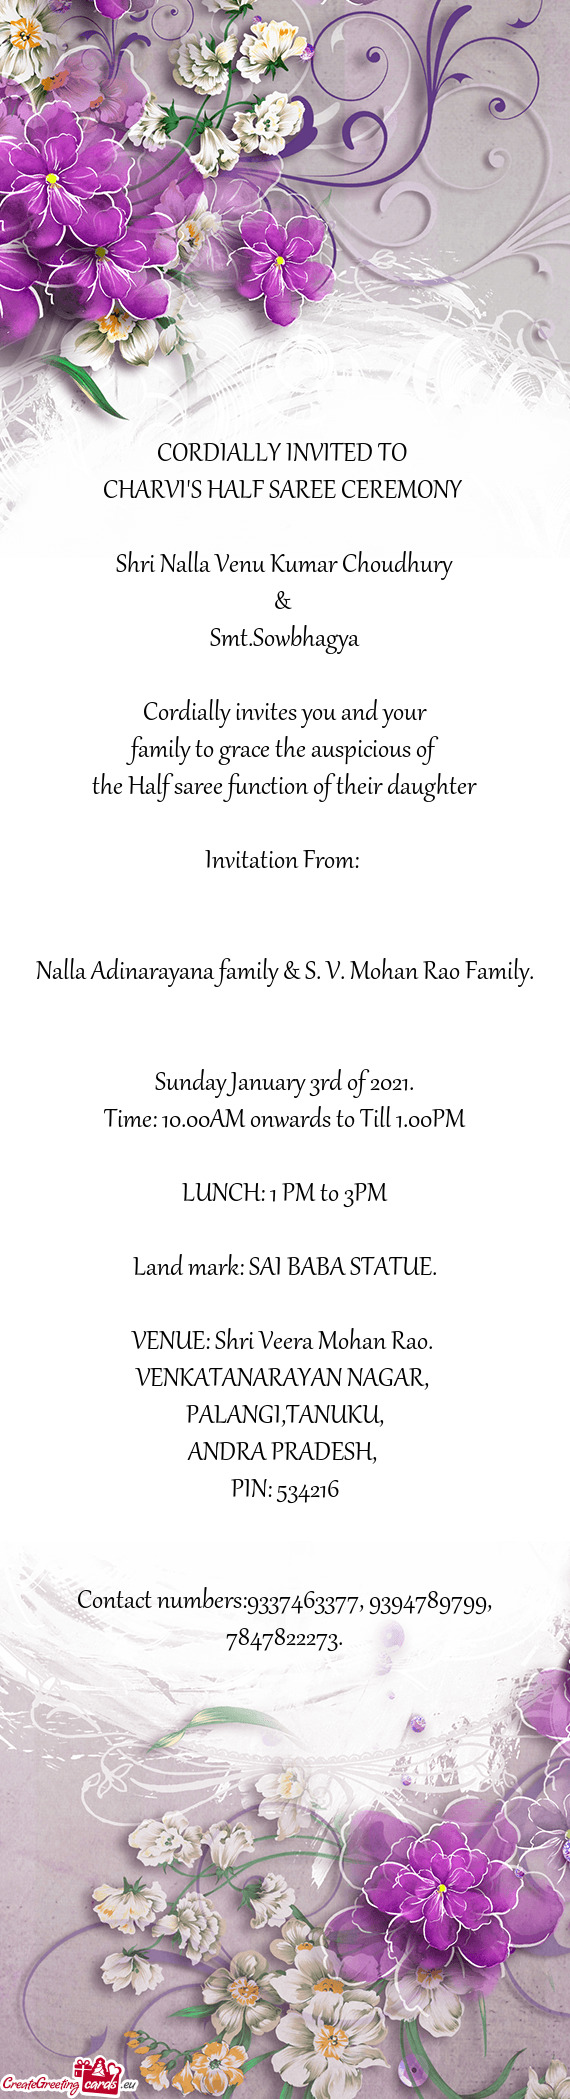 CORDIALLY INVITED TO